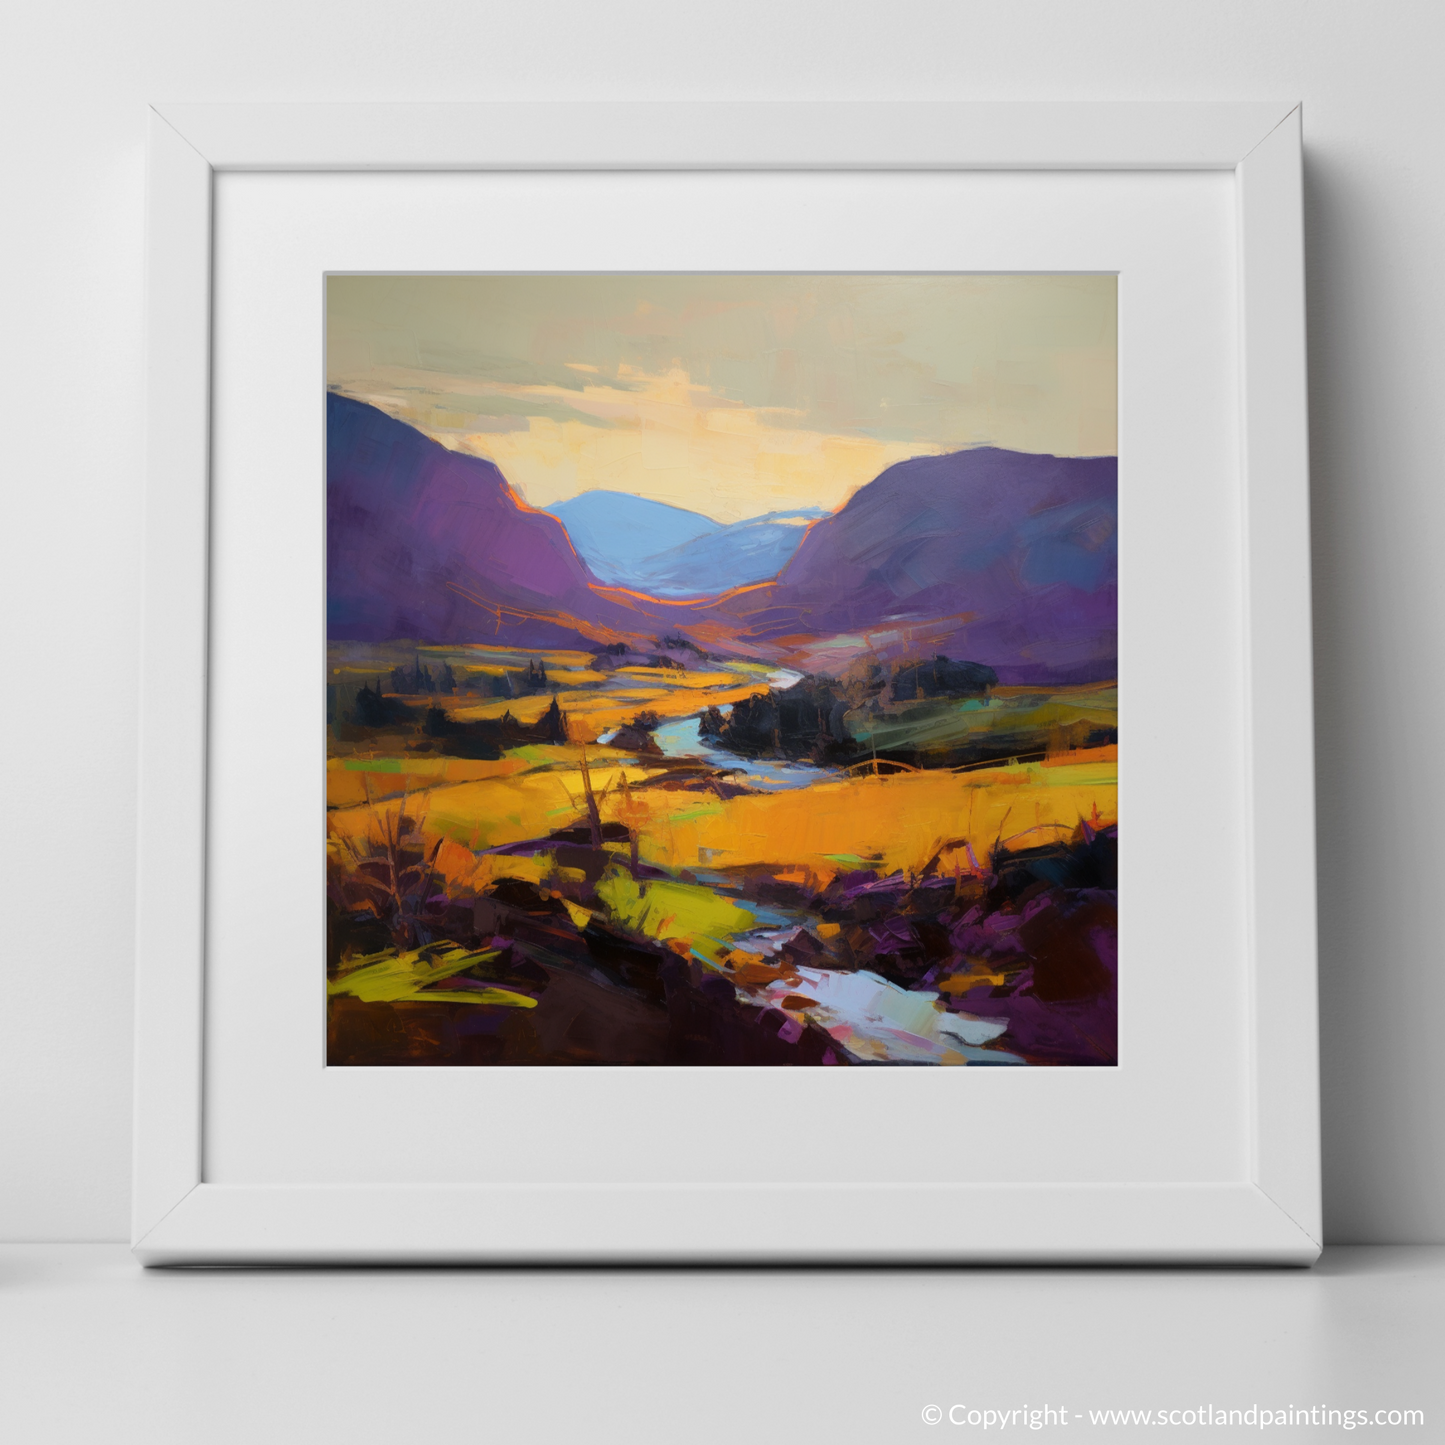 Golden Light on Heather: An Expressionist Ode to Glencoe